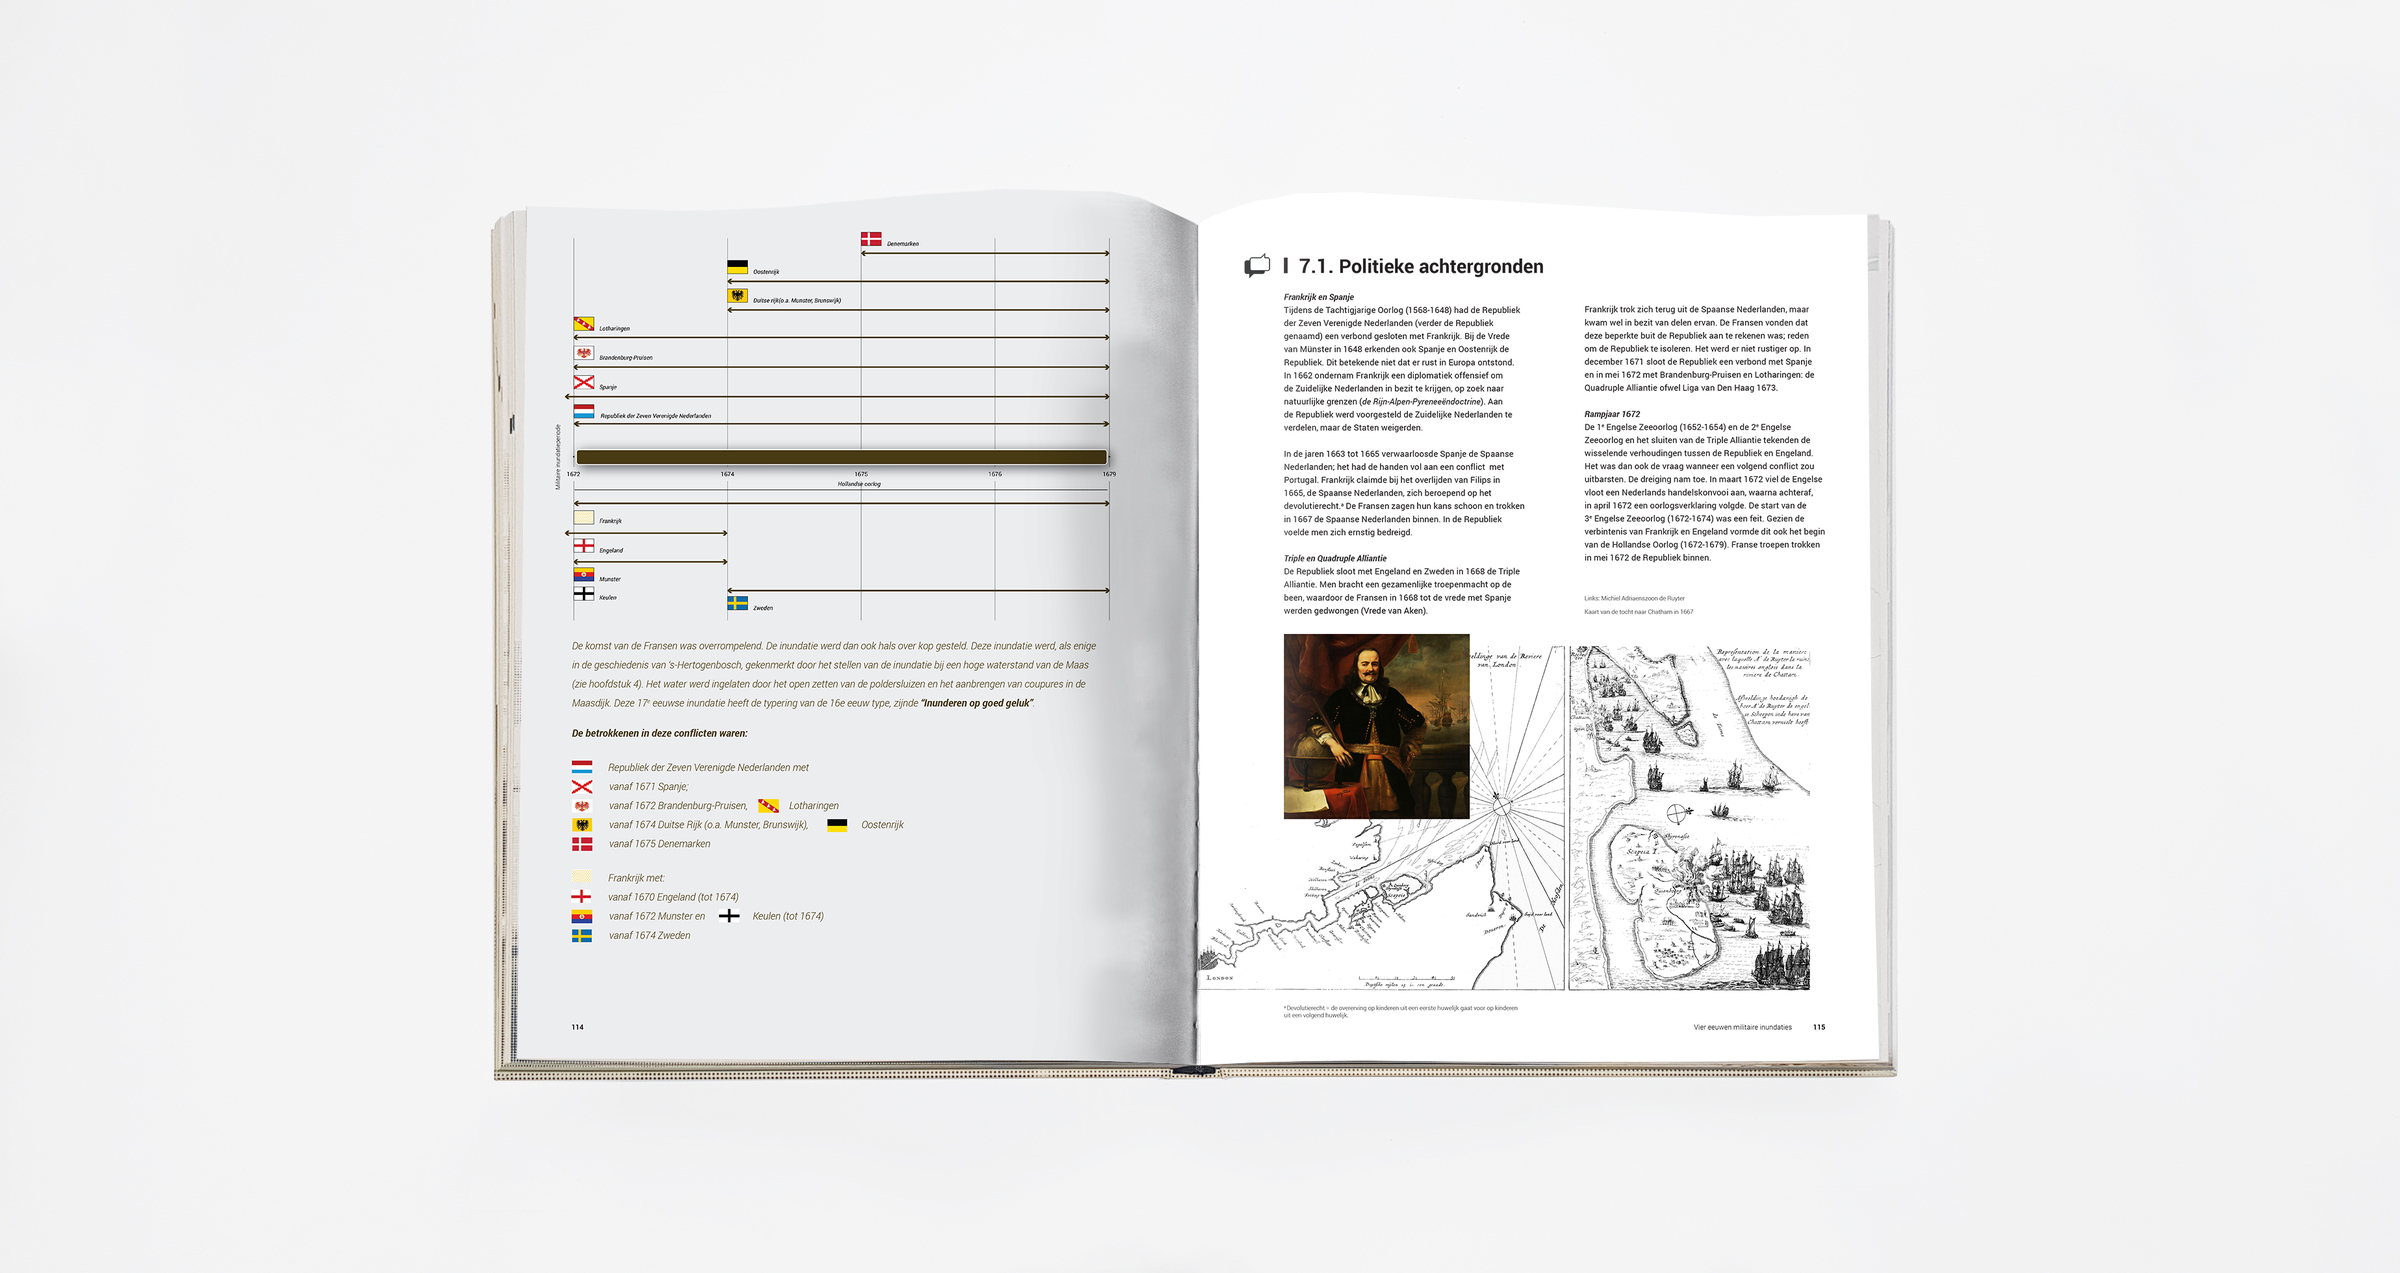  A preview of some of the 300 pages thick book.